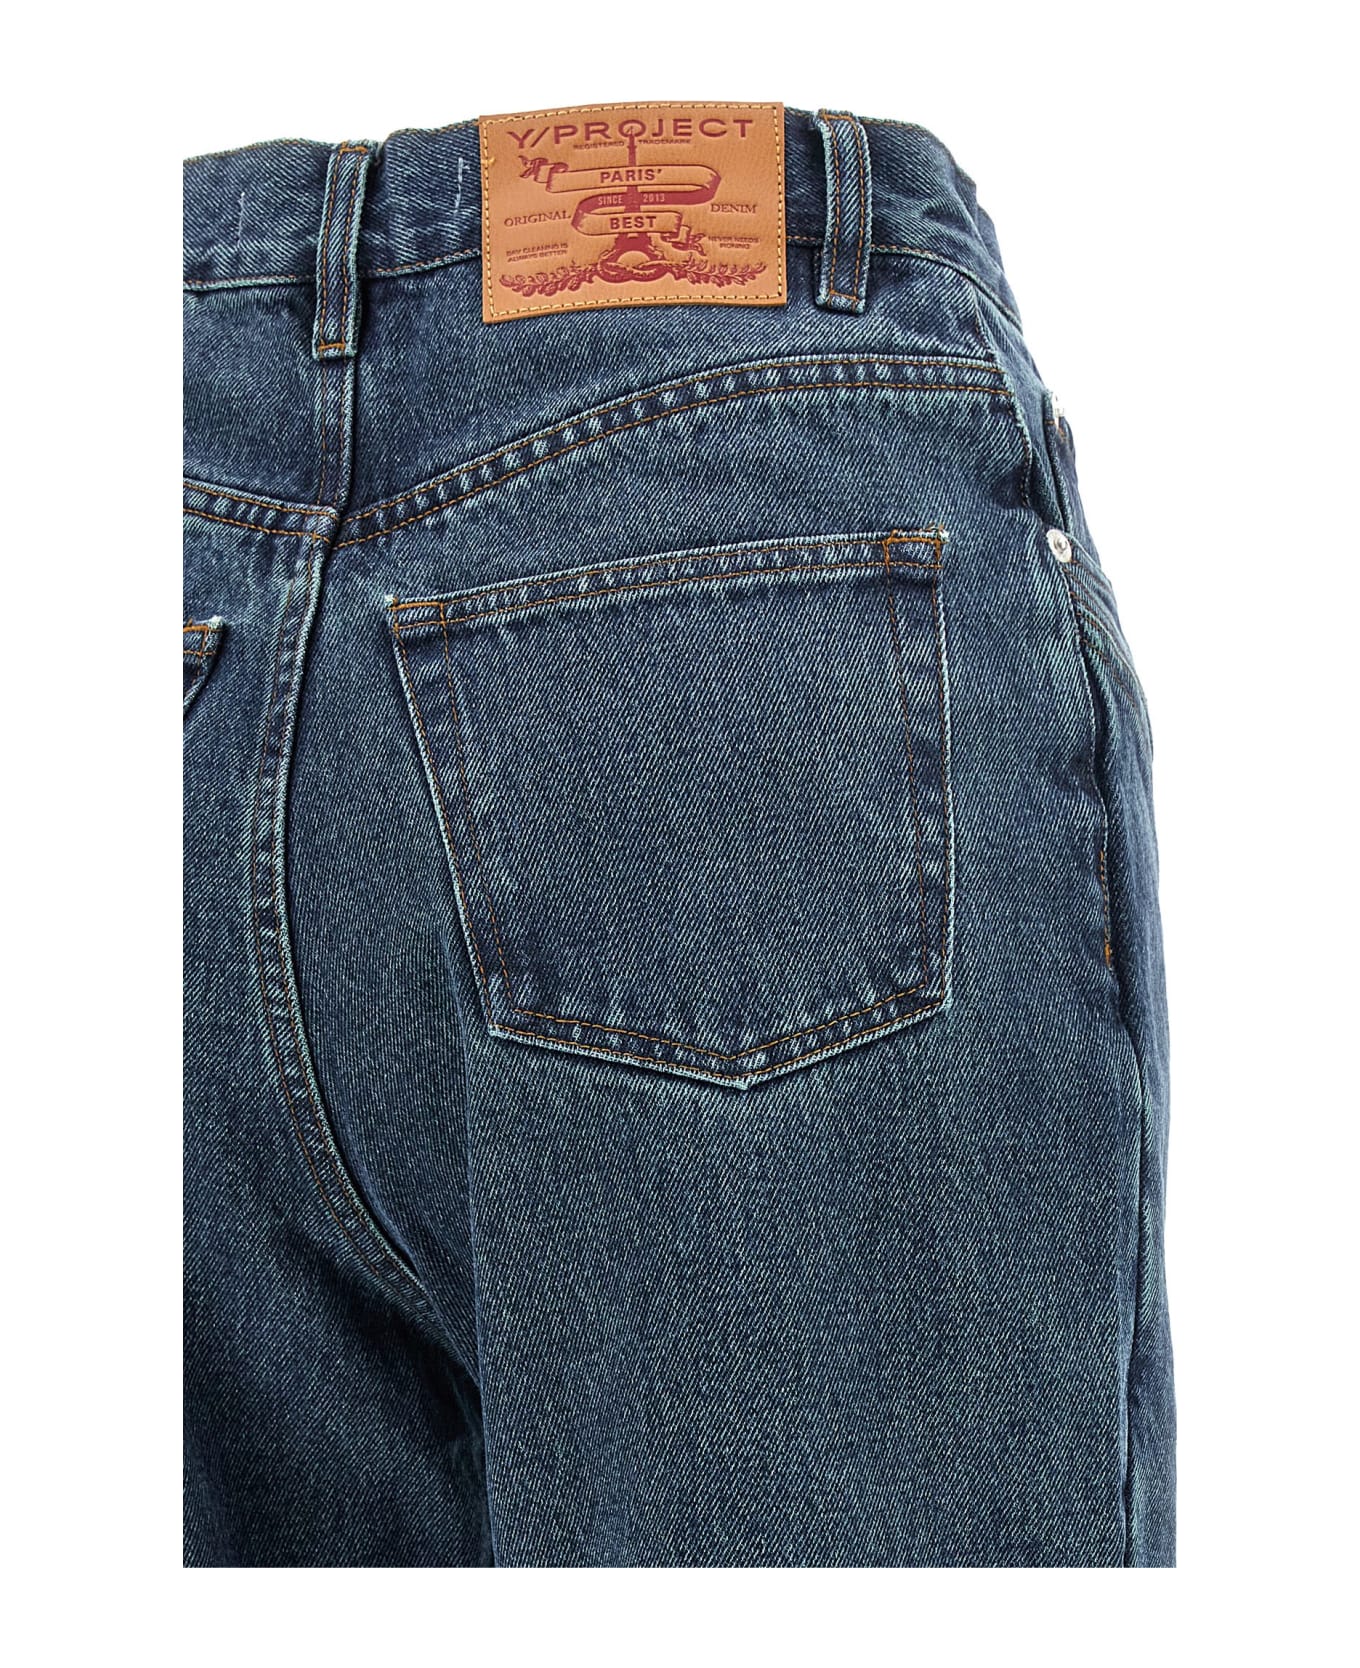 Y/Project 'evergreen Cut Out' Jeans - Blue